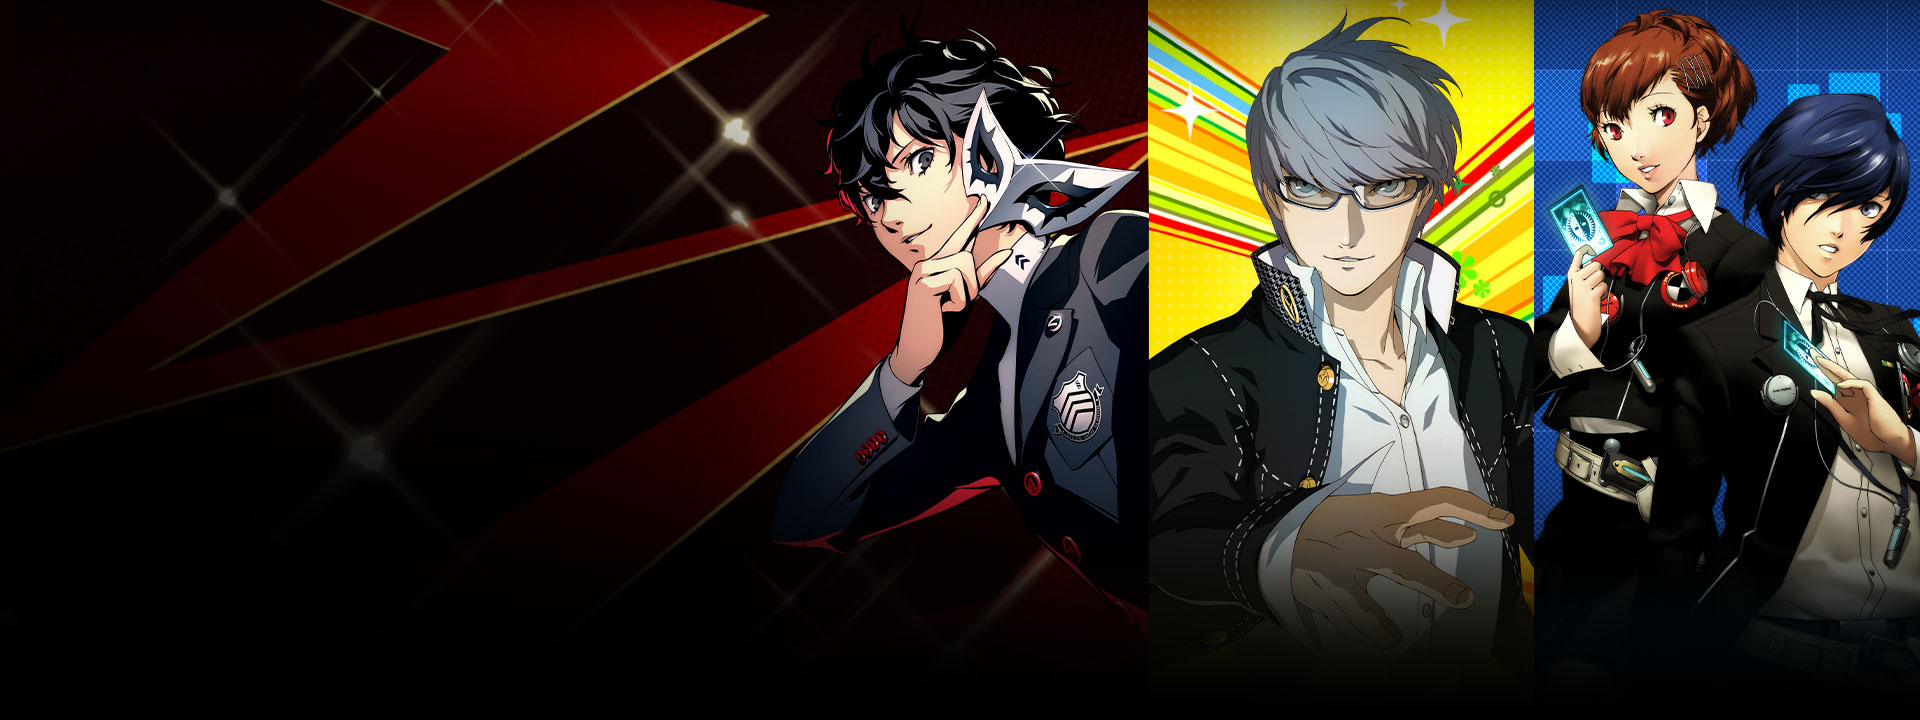 The main characters from each persona game pose next to each other.